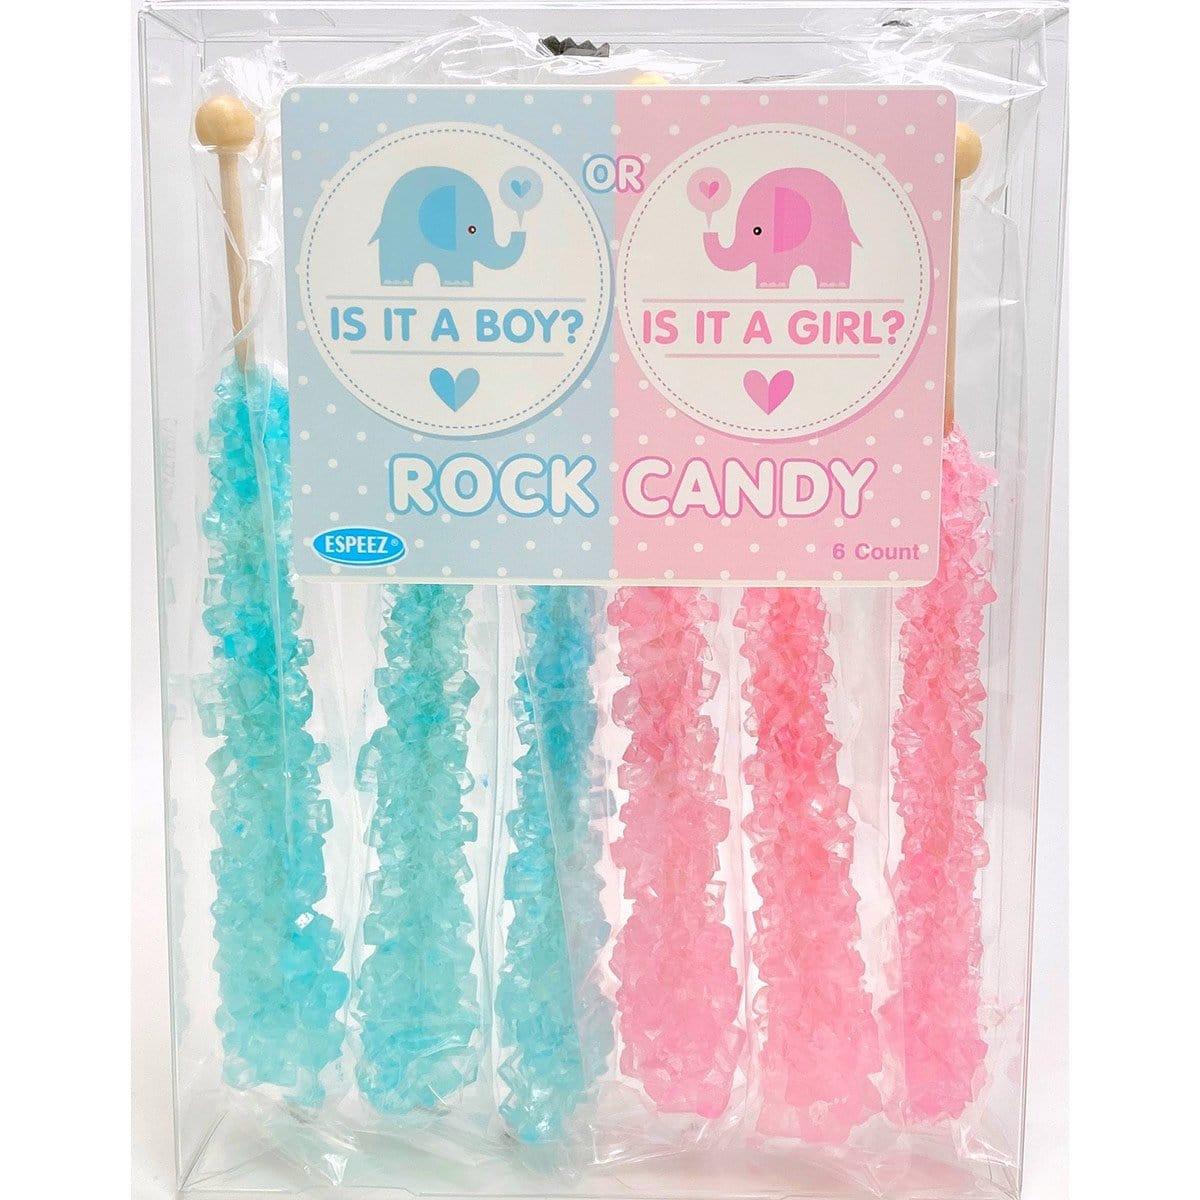 Buy Candy Gender Reveal Rock Candy On Stick, 6 Count sold at Party Expert